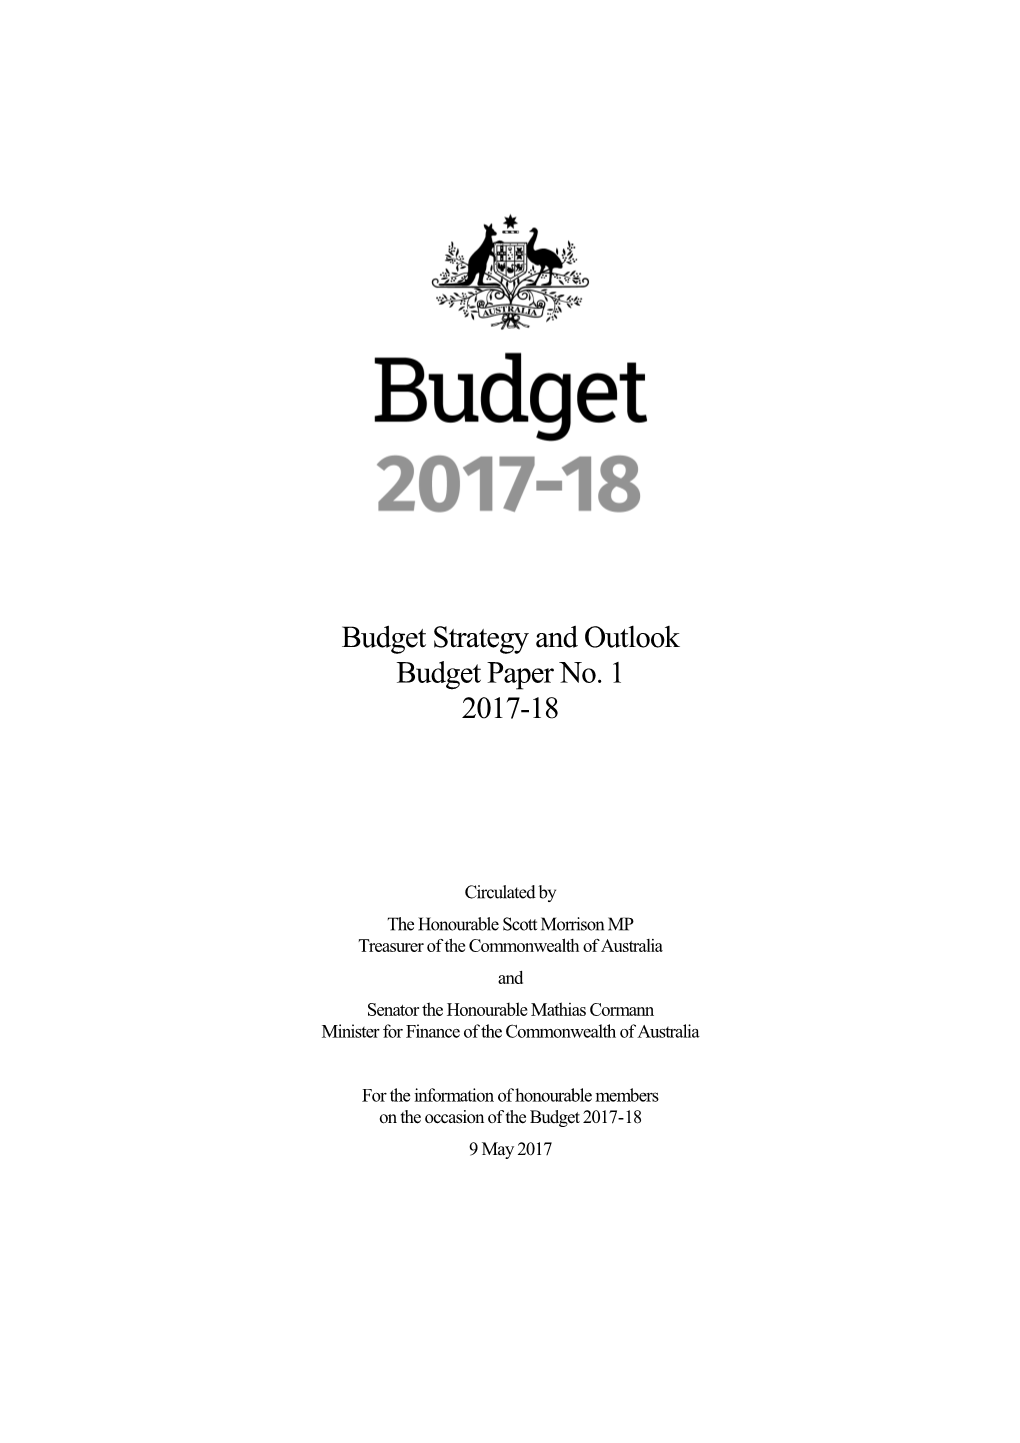 Budget 2017-18 - Budget Paper No. 1 - Budget Strategy and Outlook - Preliminaries